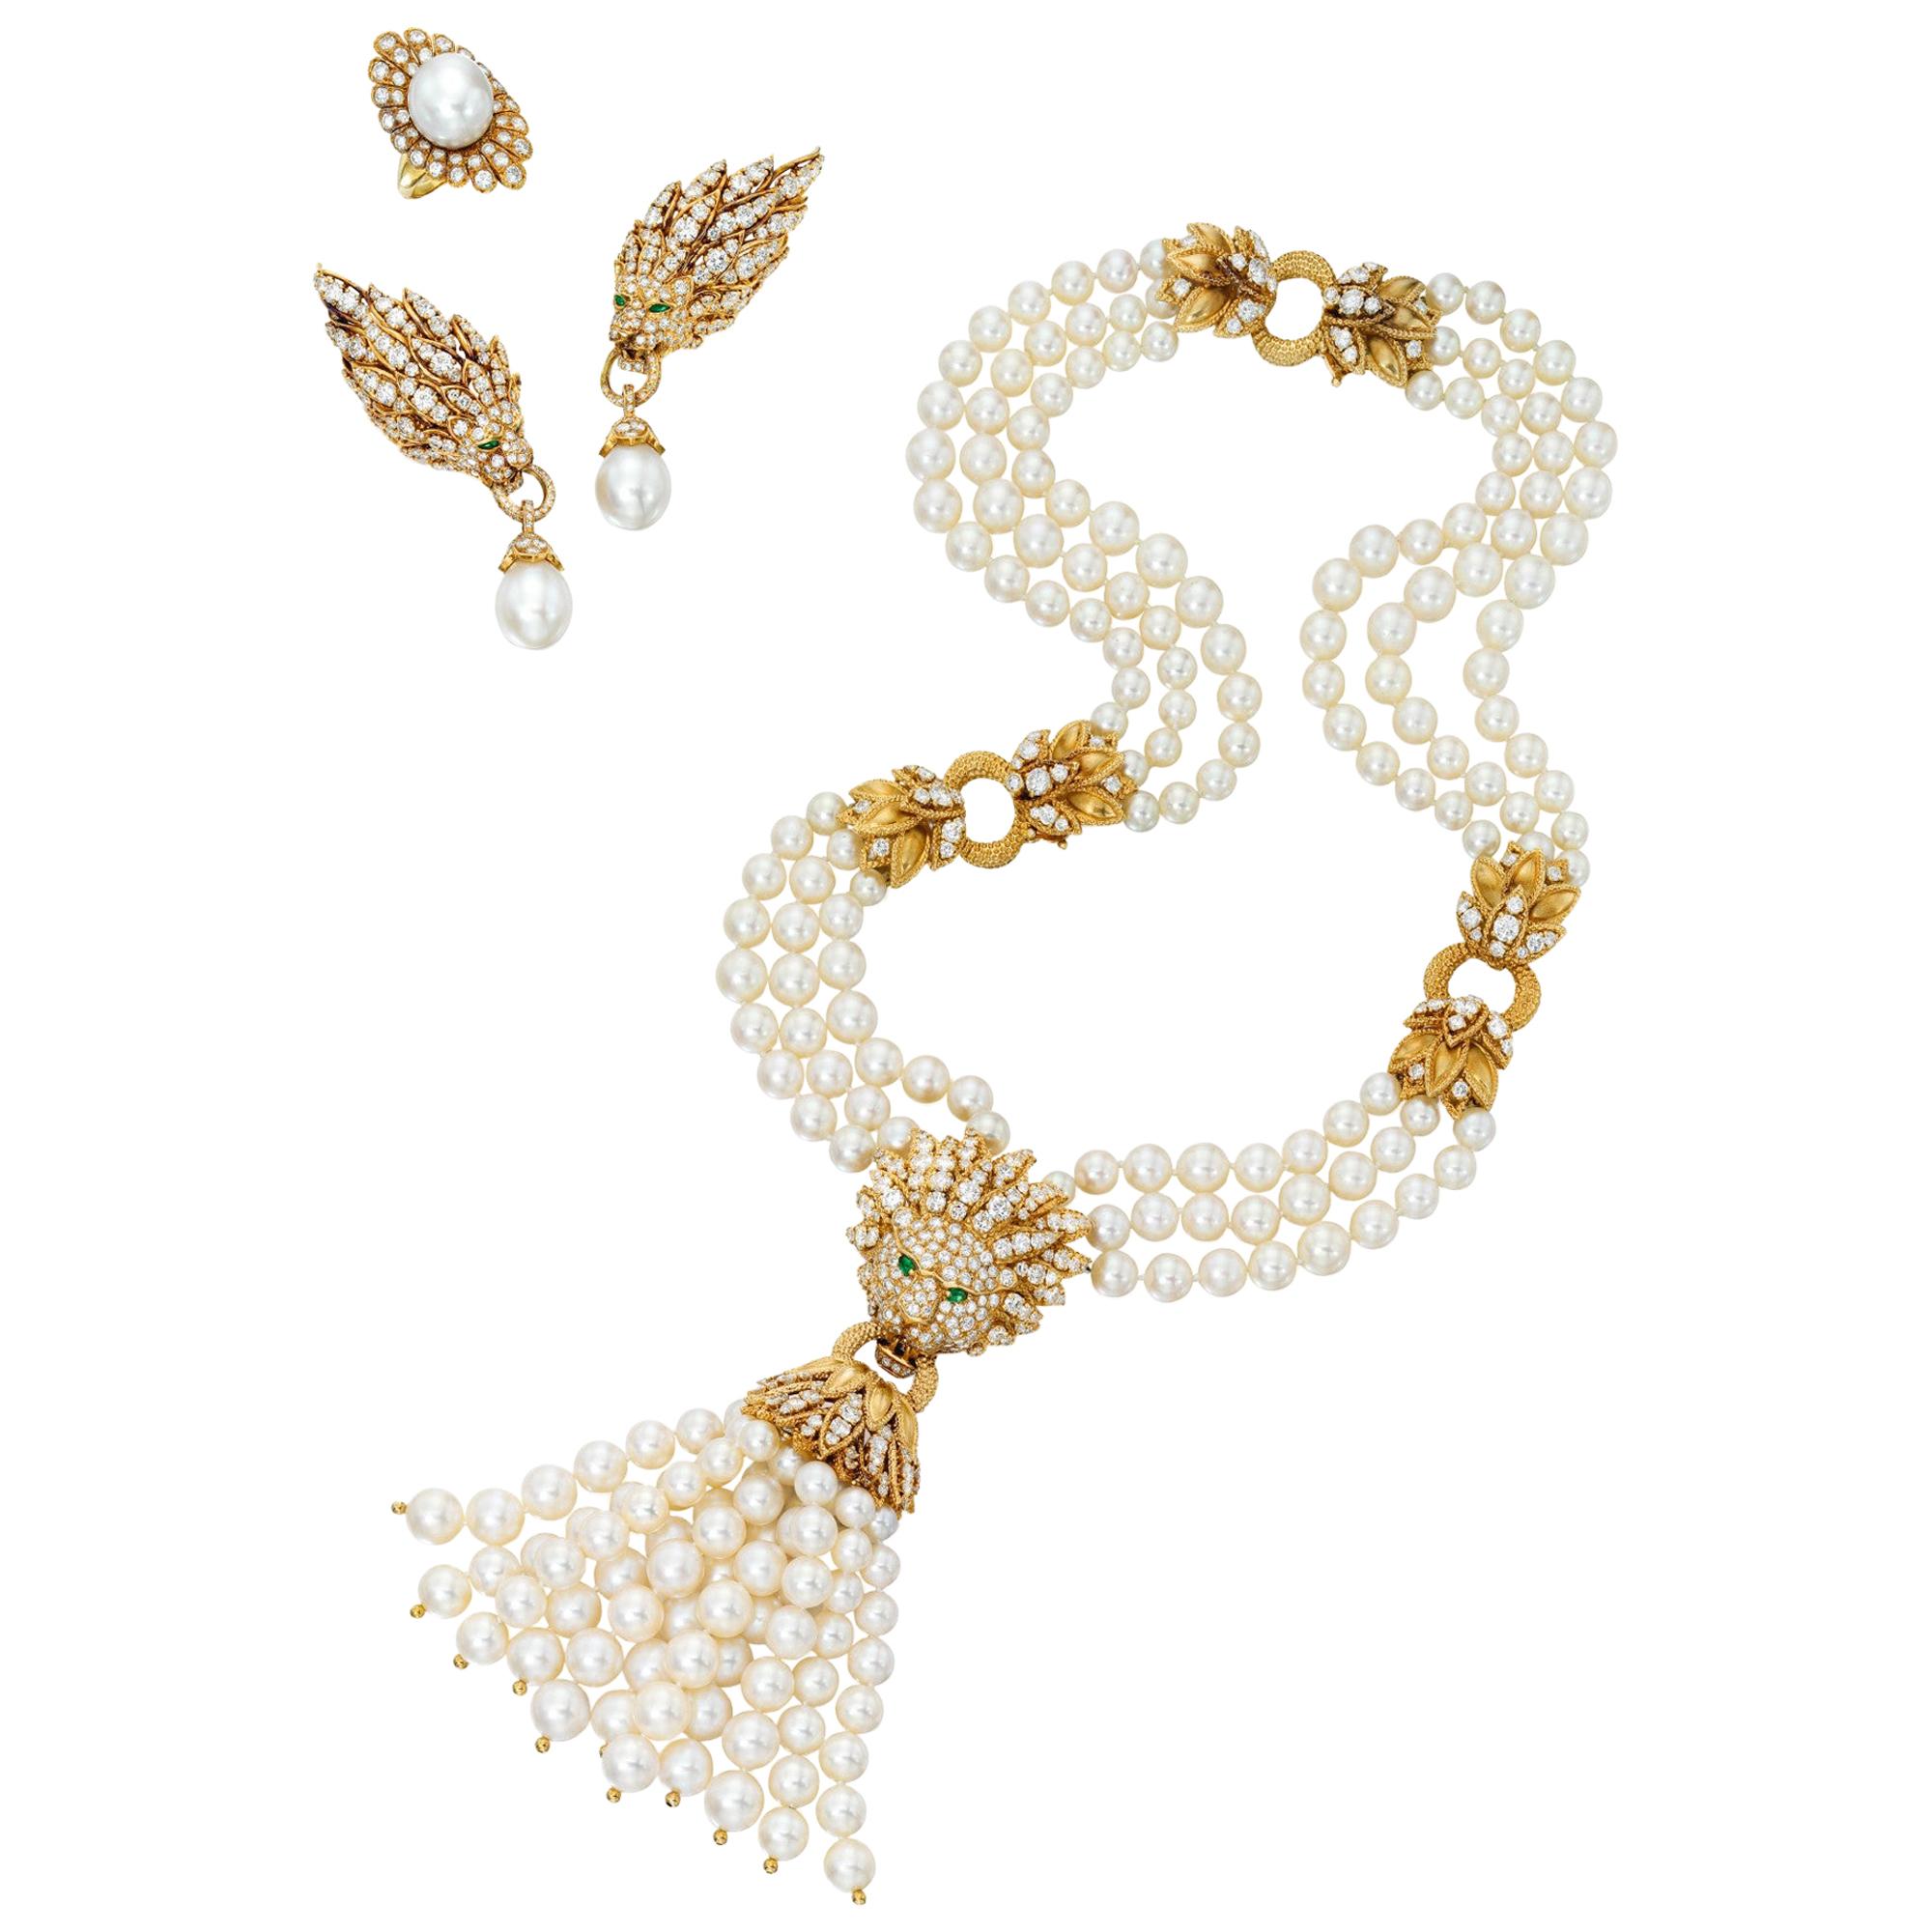 Iconic Van Cleef & Arpels Pearl and Diamond Lion Necklace, Earrings and Ring Set